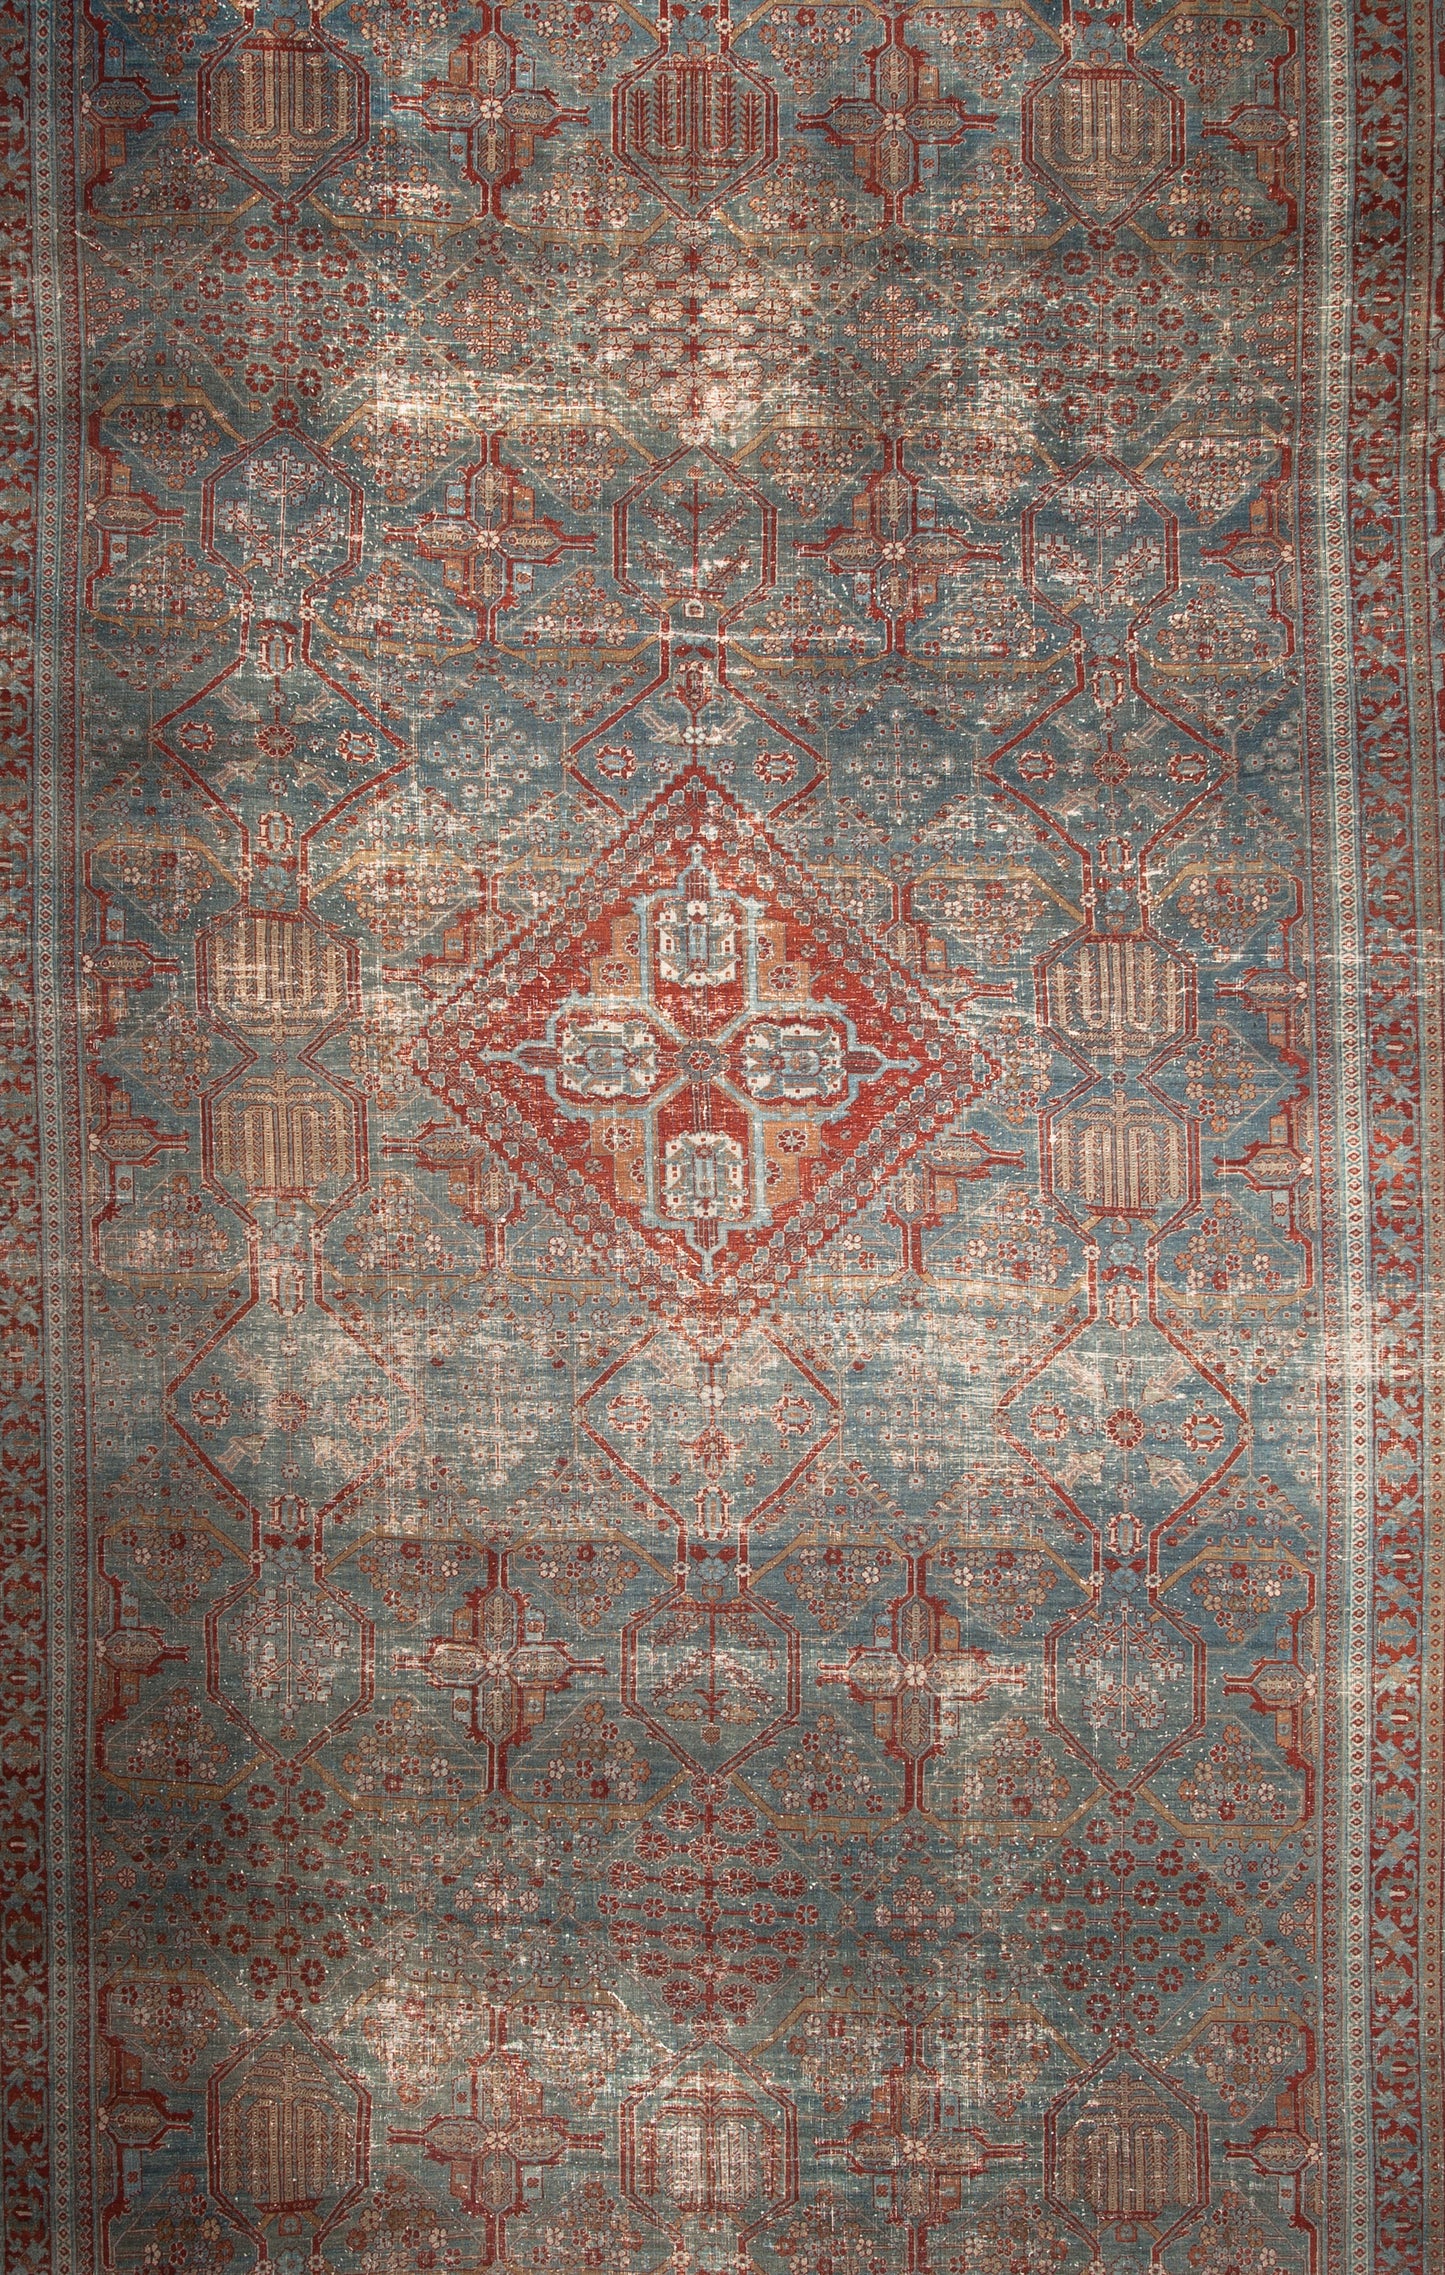 The center focal area of the rug has a red rhombus with a geometrical pattern.